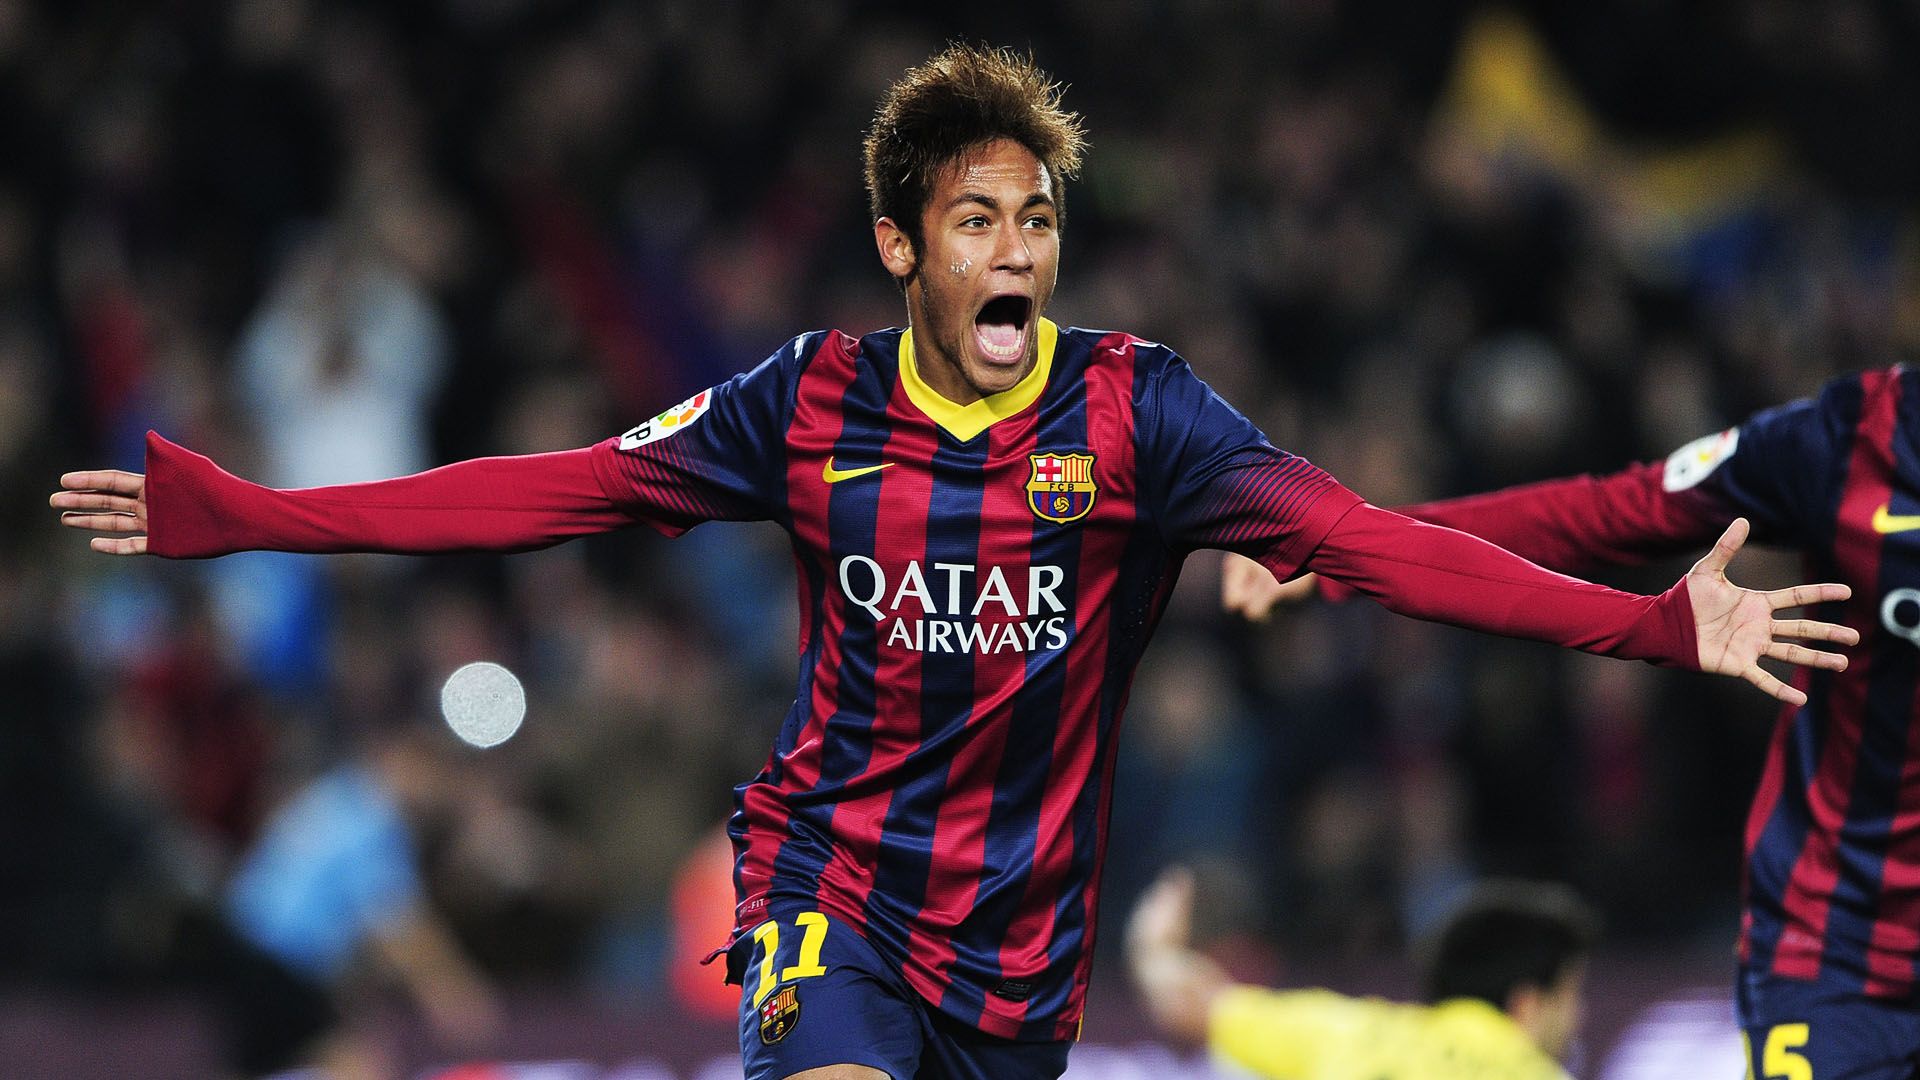 Download Neymar wallpapers for mobile phone free Neymar HD pictures